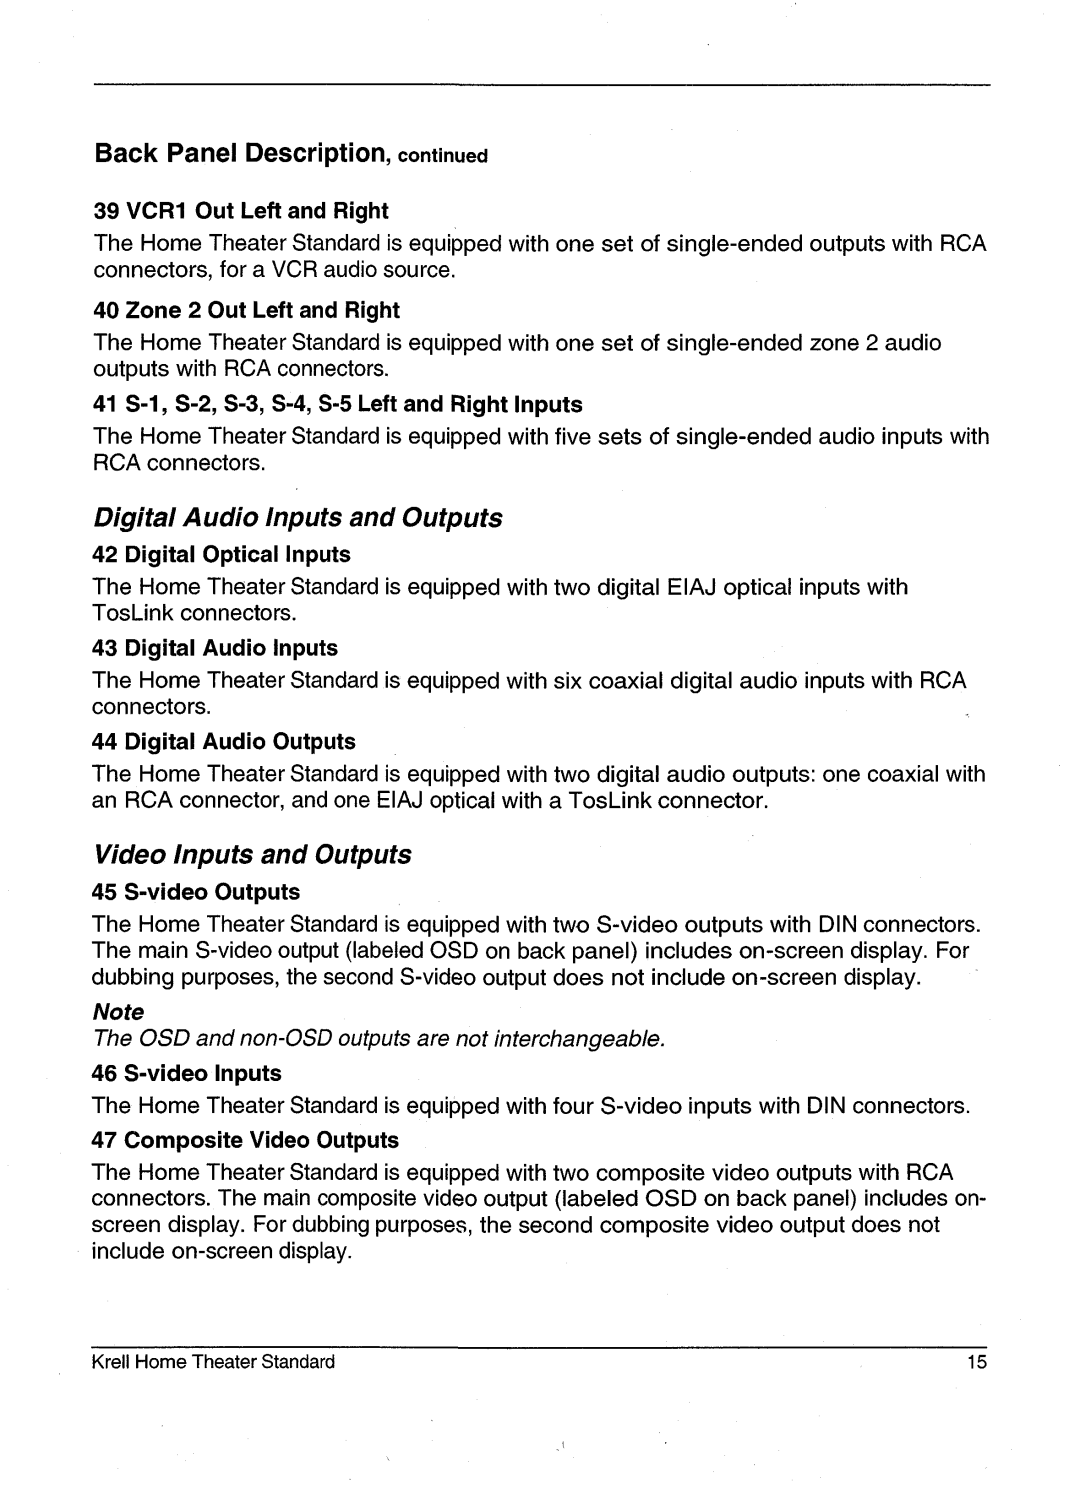 Krell Industries HTS 2 manual BackPanelDescription,continued, Digital Audio Inputs and Outputs, Video Inputs and Outputs 